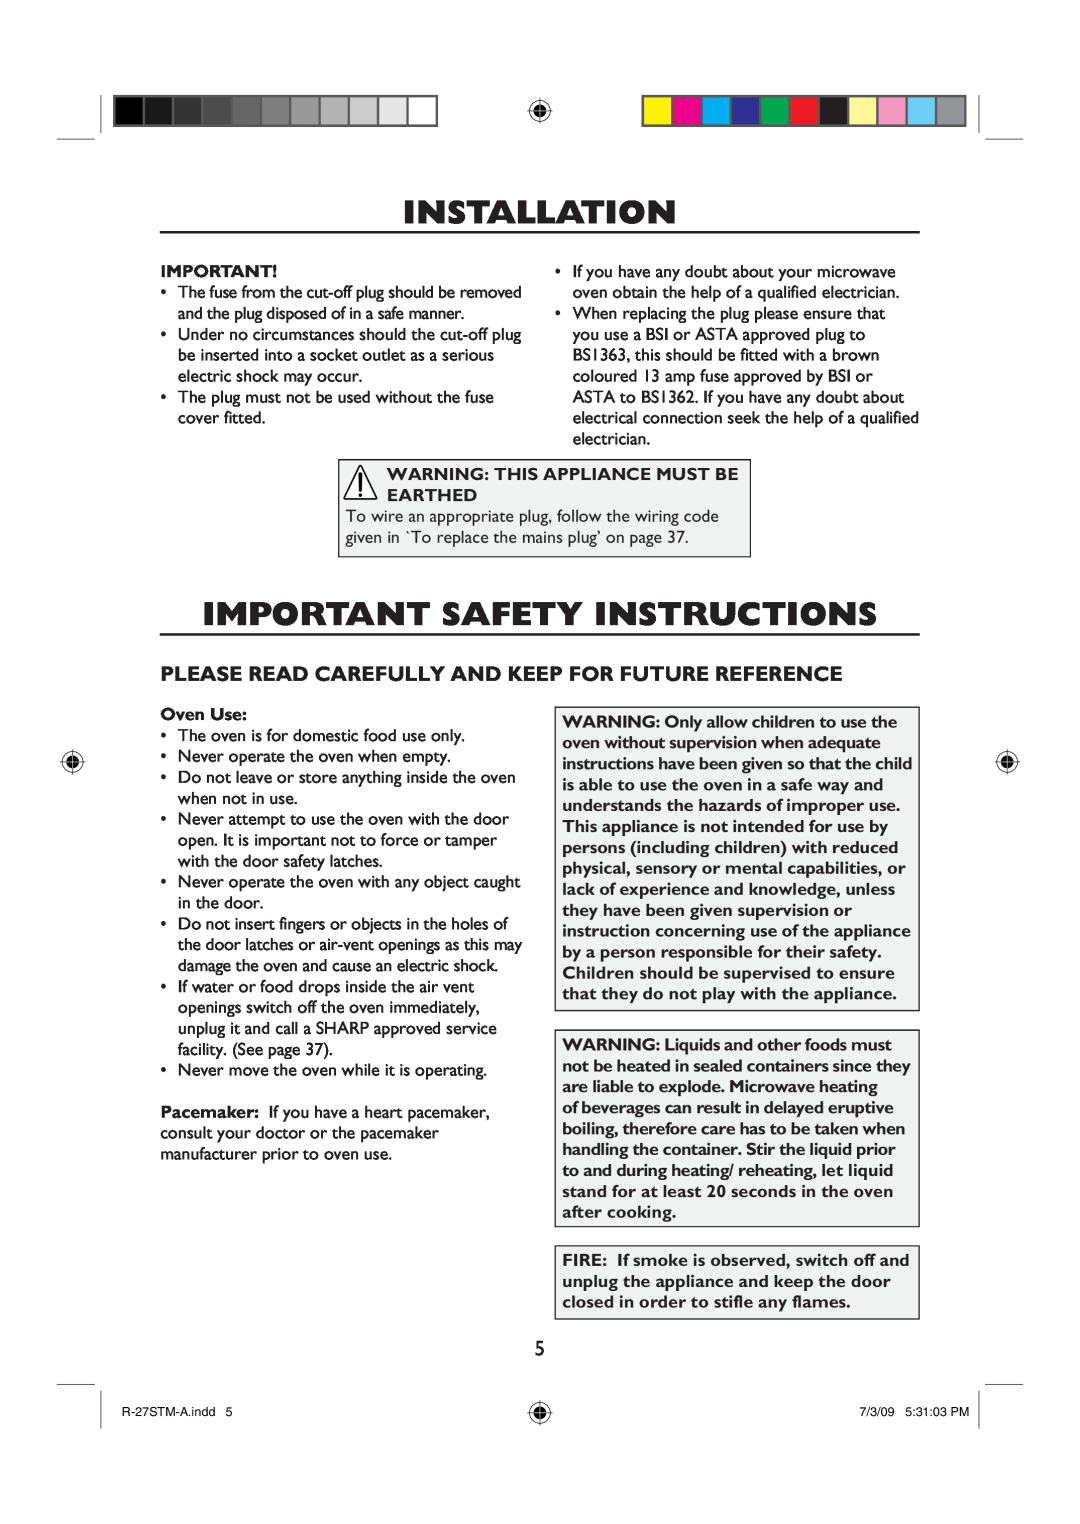 Sharp R-27STM-A Important Safety Instructions, Please Read Carefully And Keep For Future Reference, Oven Use, Installation 